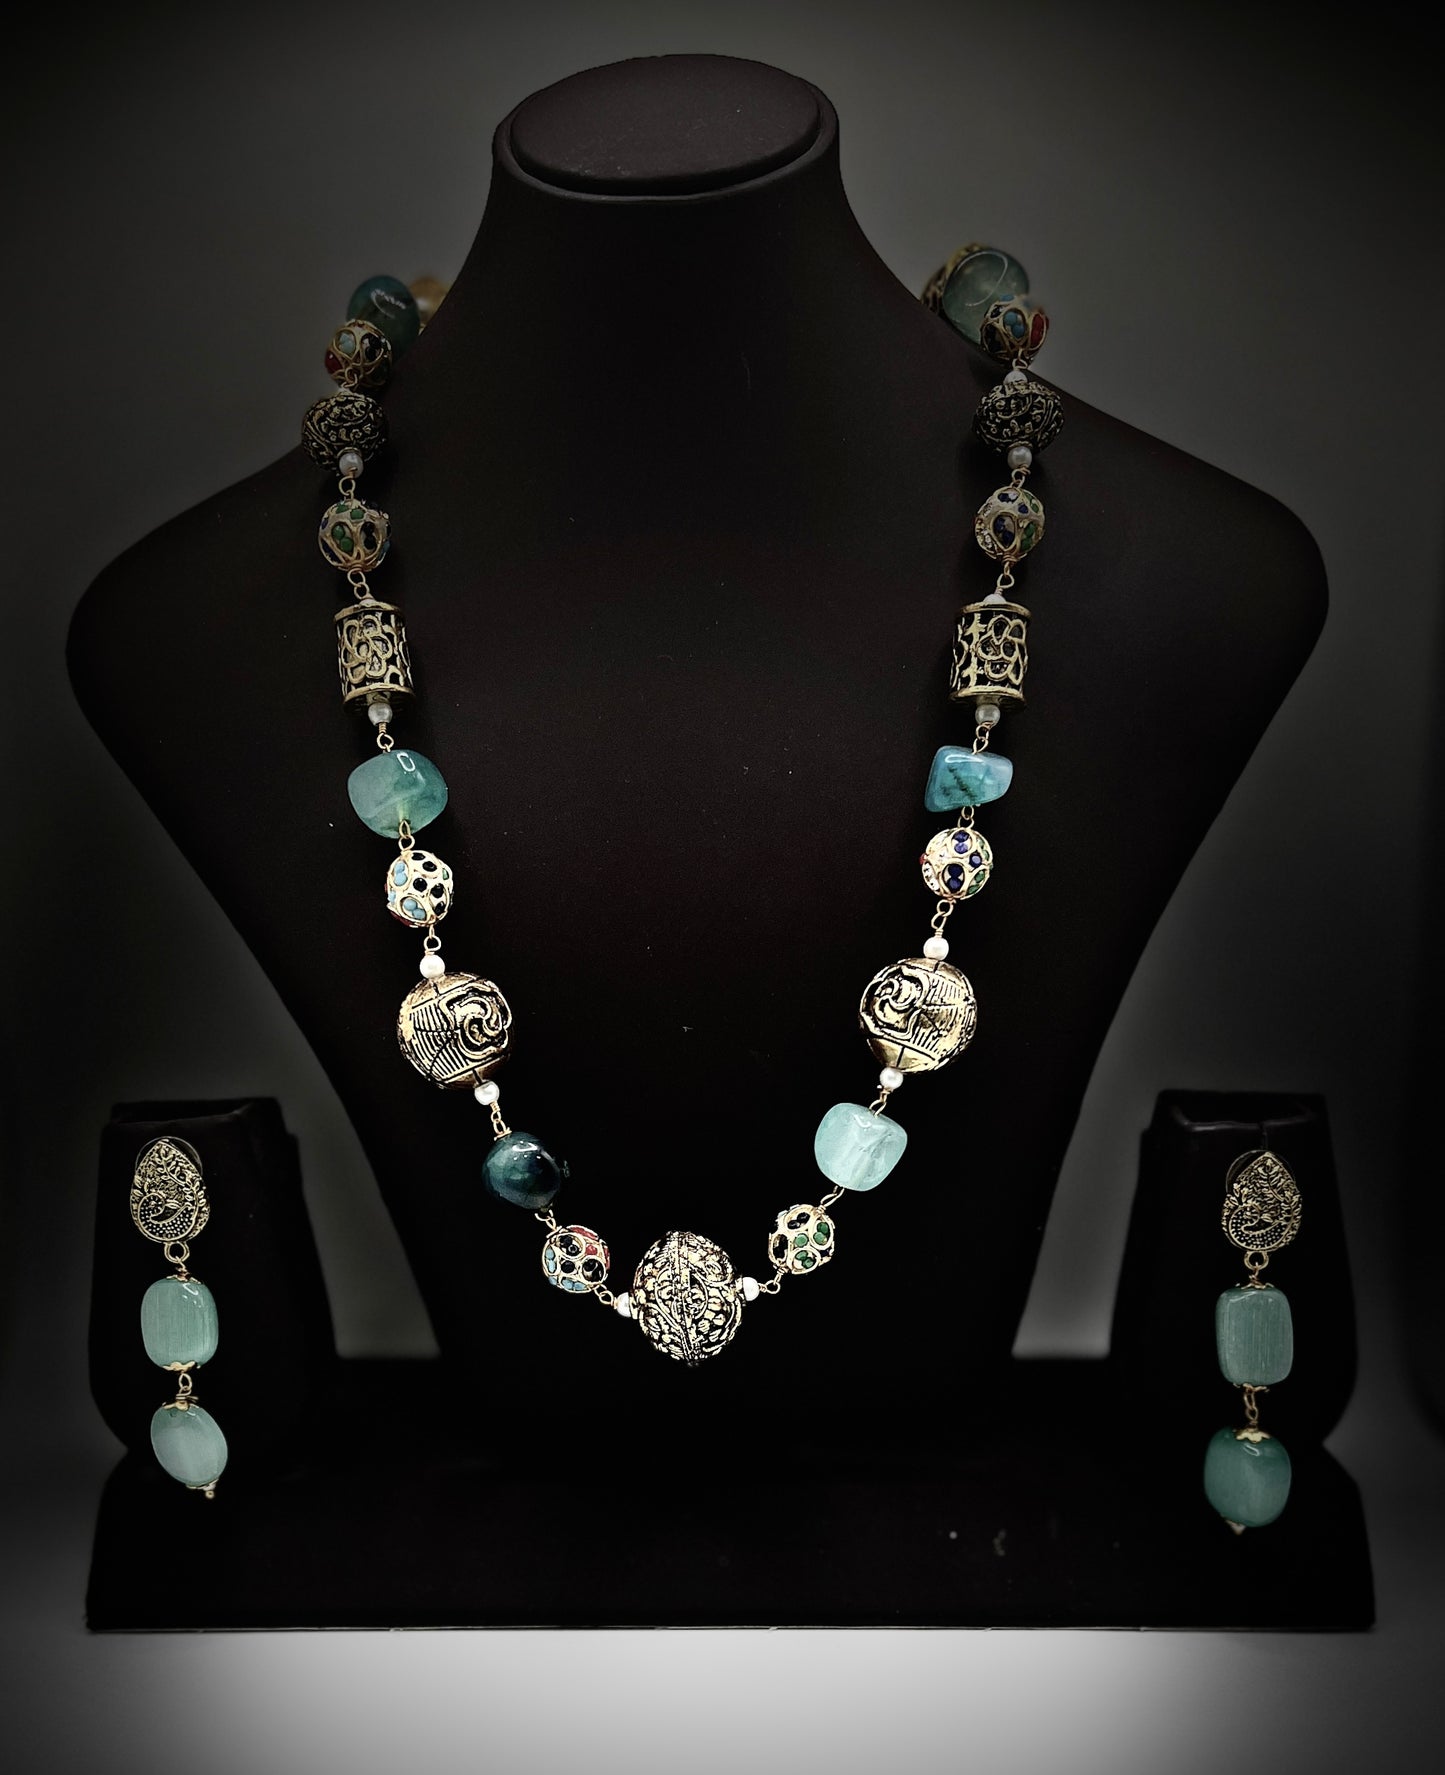 Turquoise Tapestry: Artisanal Beaded Necklace and Earrings Set